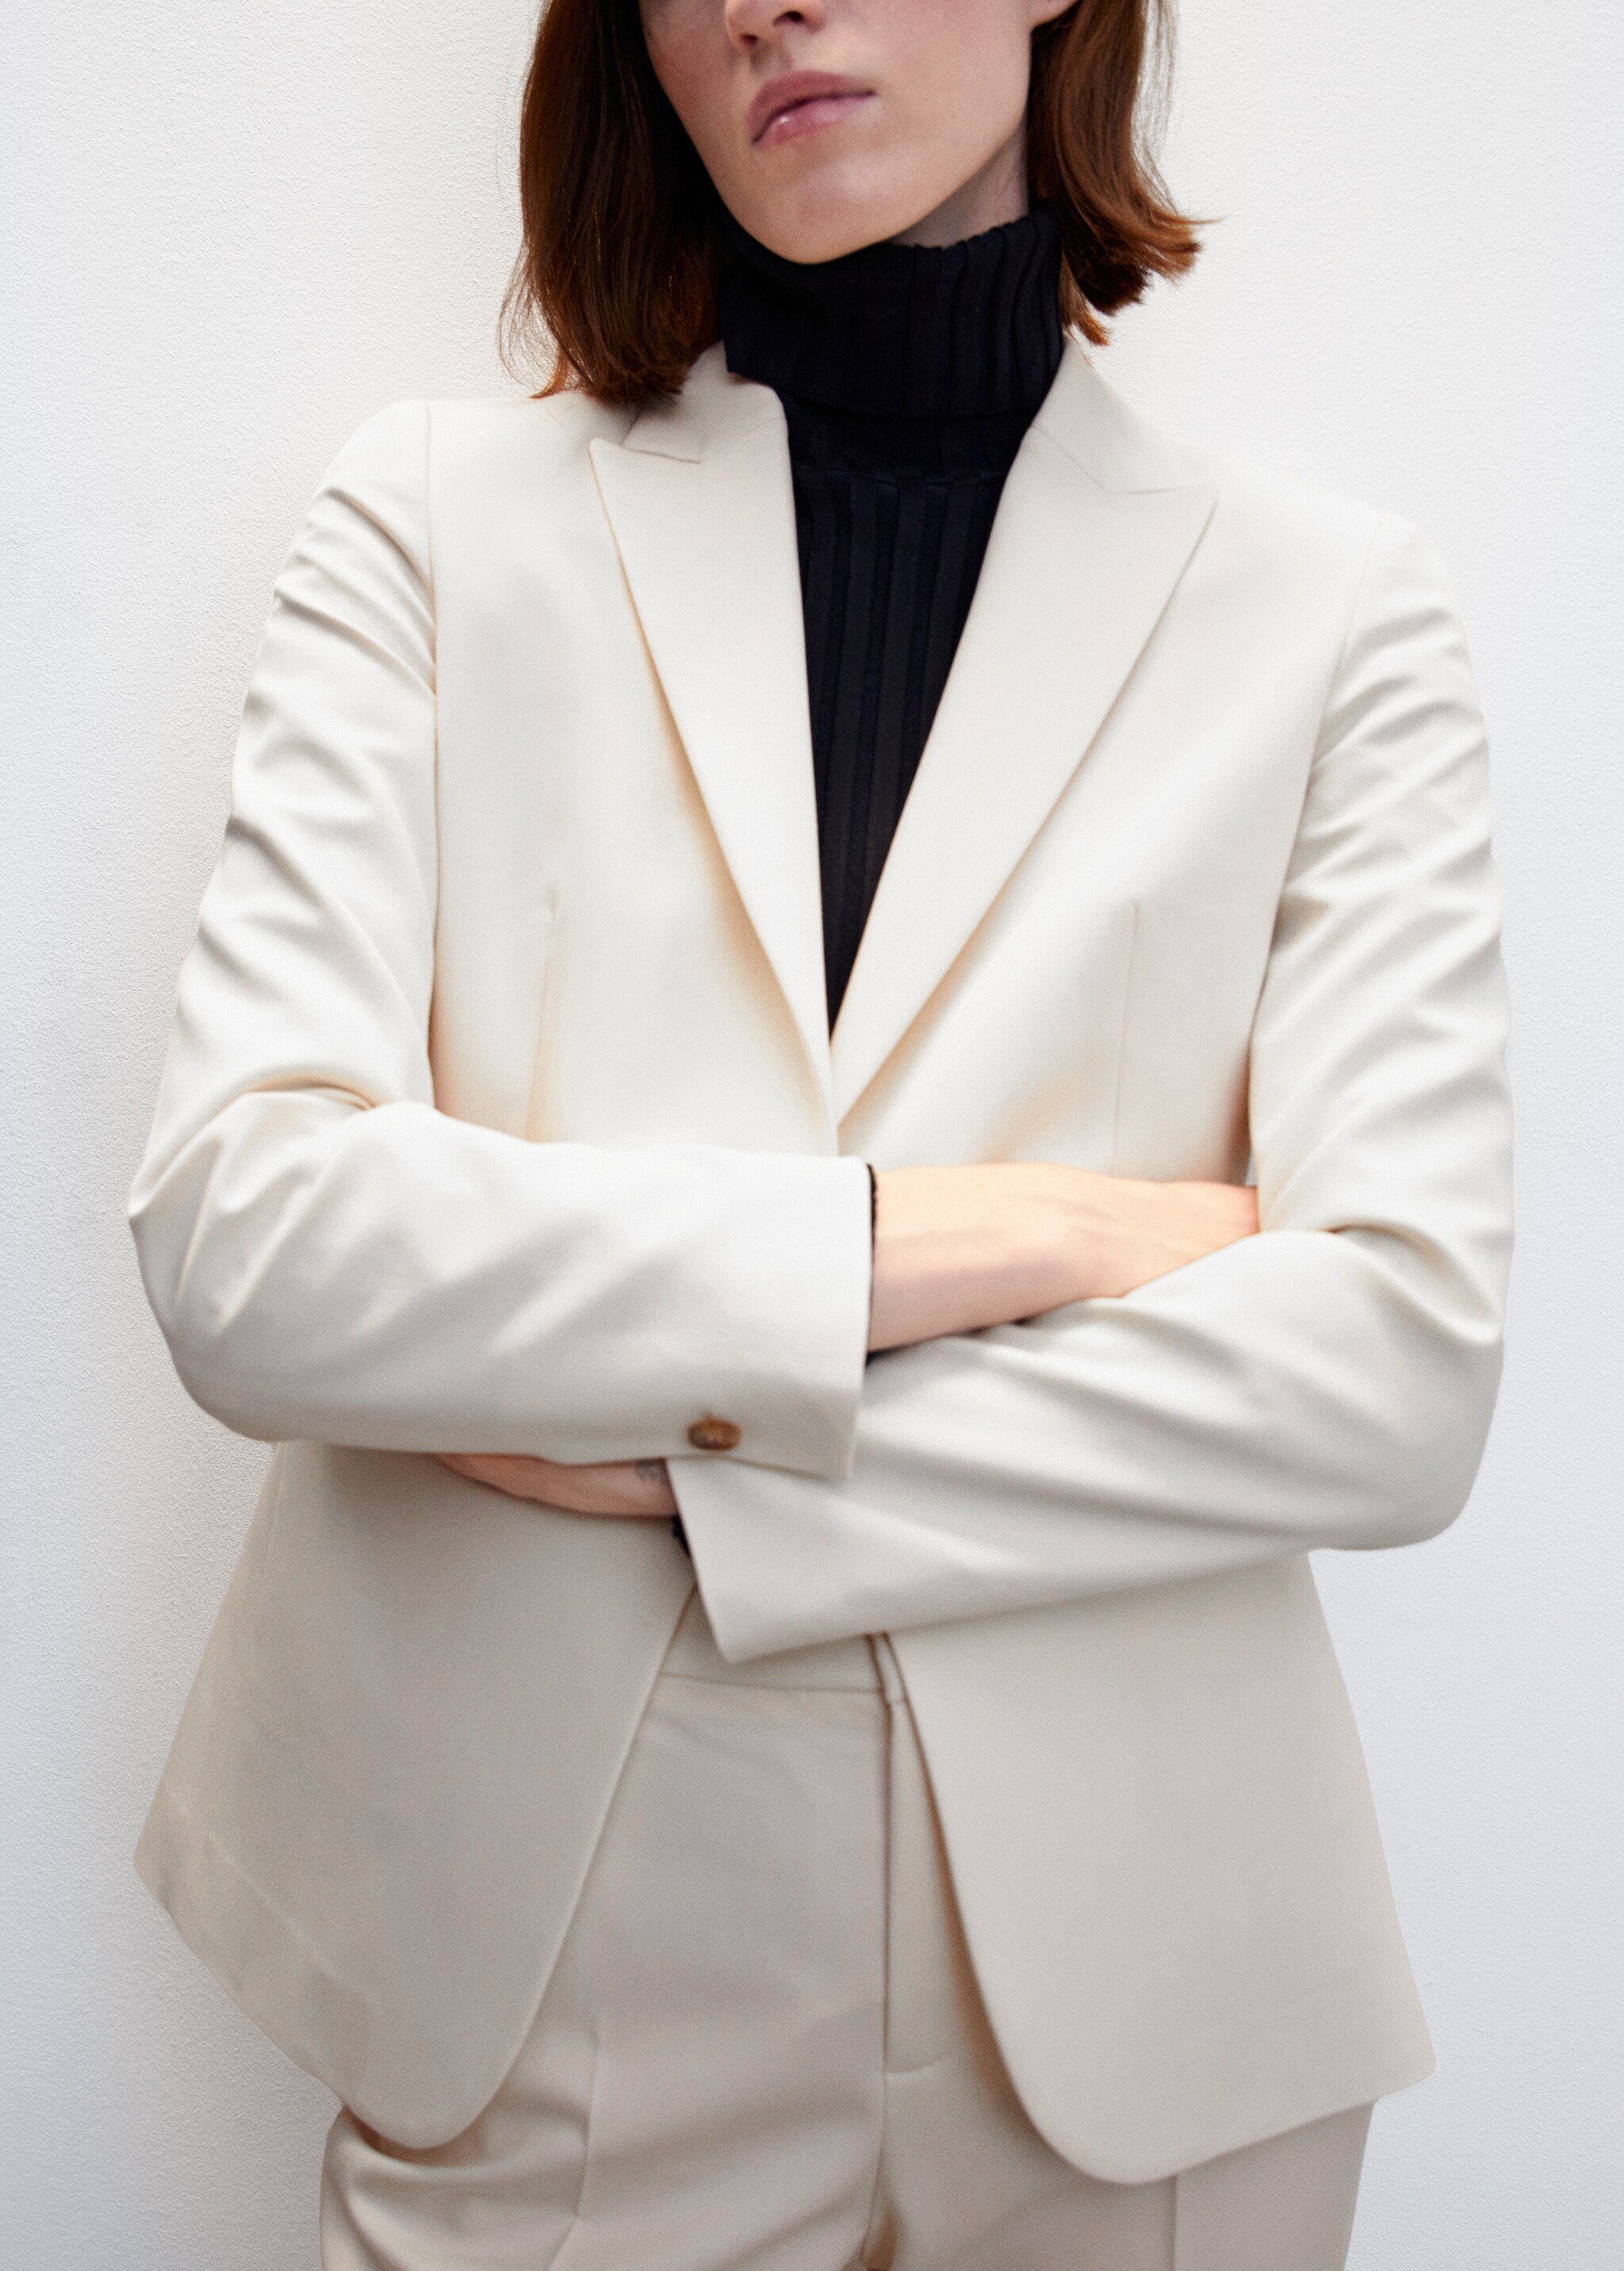 Fitted suit jacket - Details of the article 1